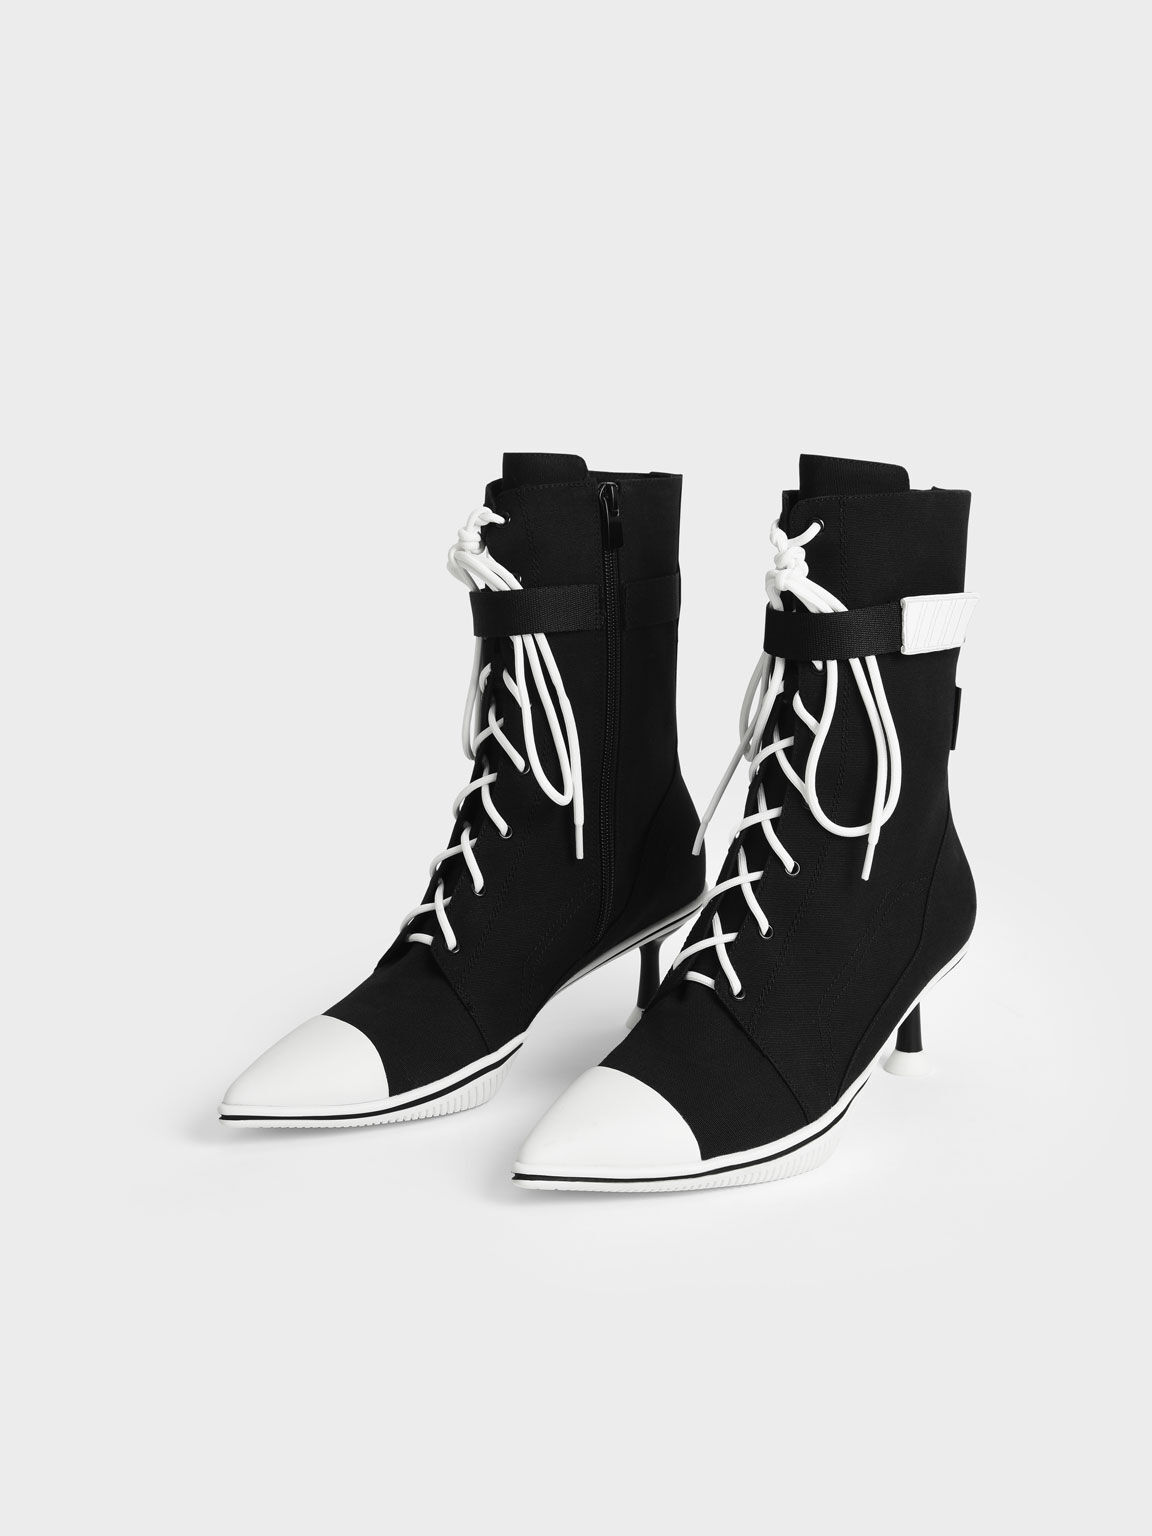 Recycled Cotton Lace-Up Ankle Boots, Black, hi-res